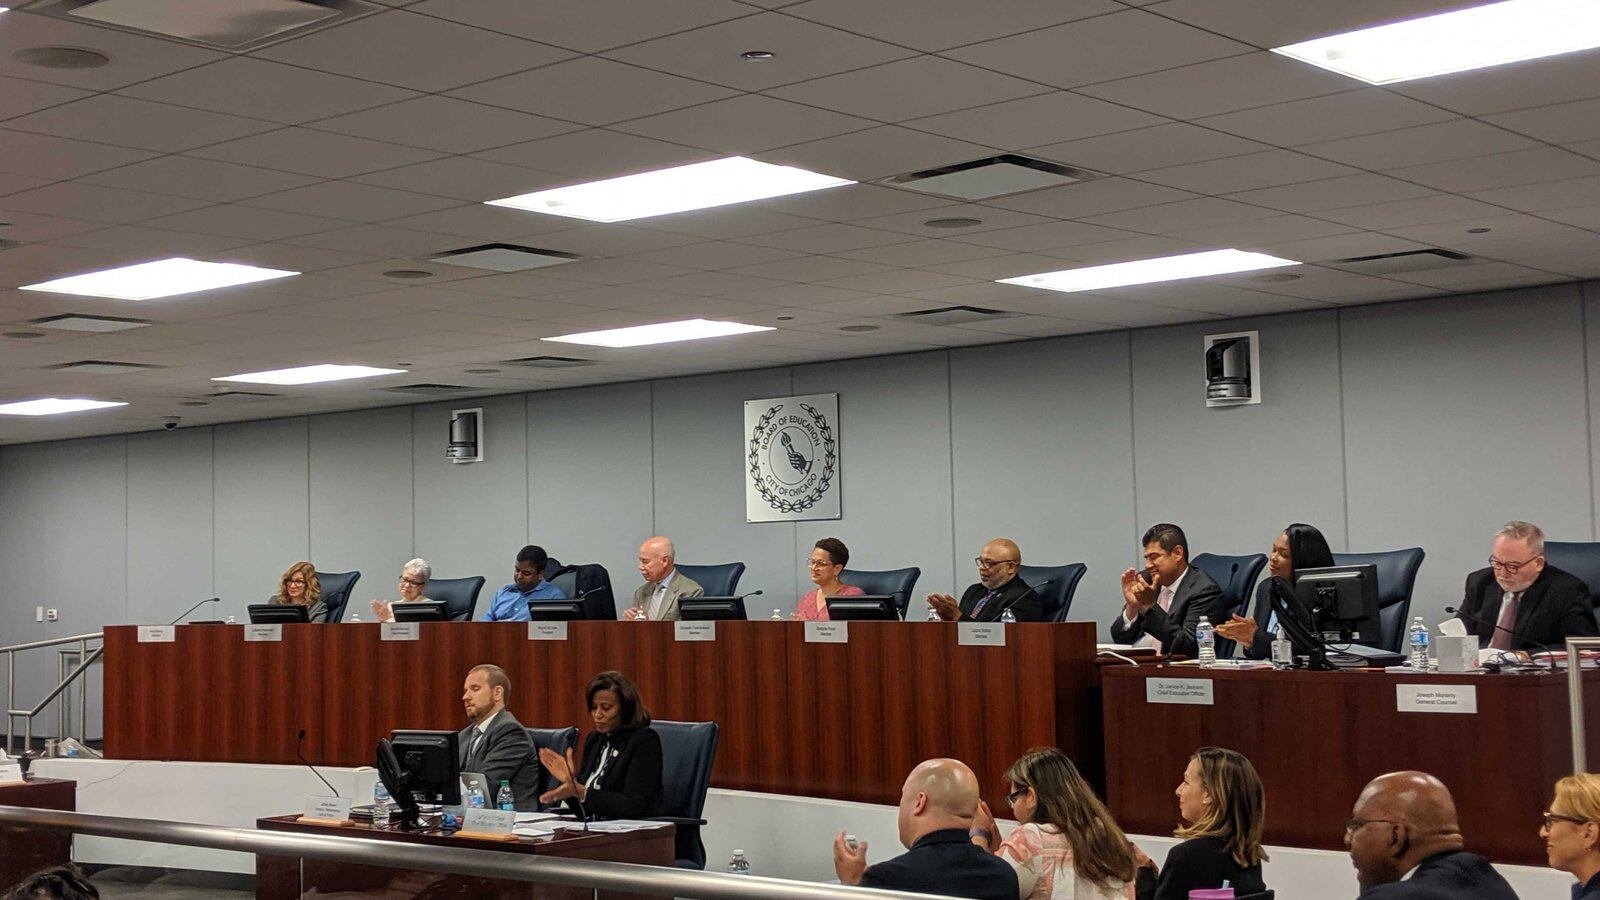 Chicago's new school board presides over its first meeting on June 26, 2019.